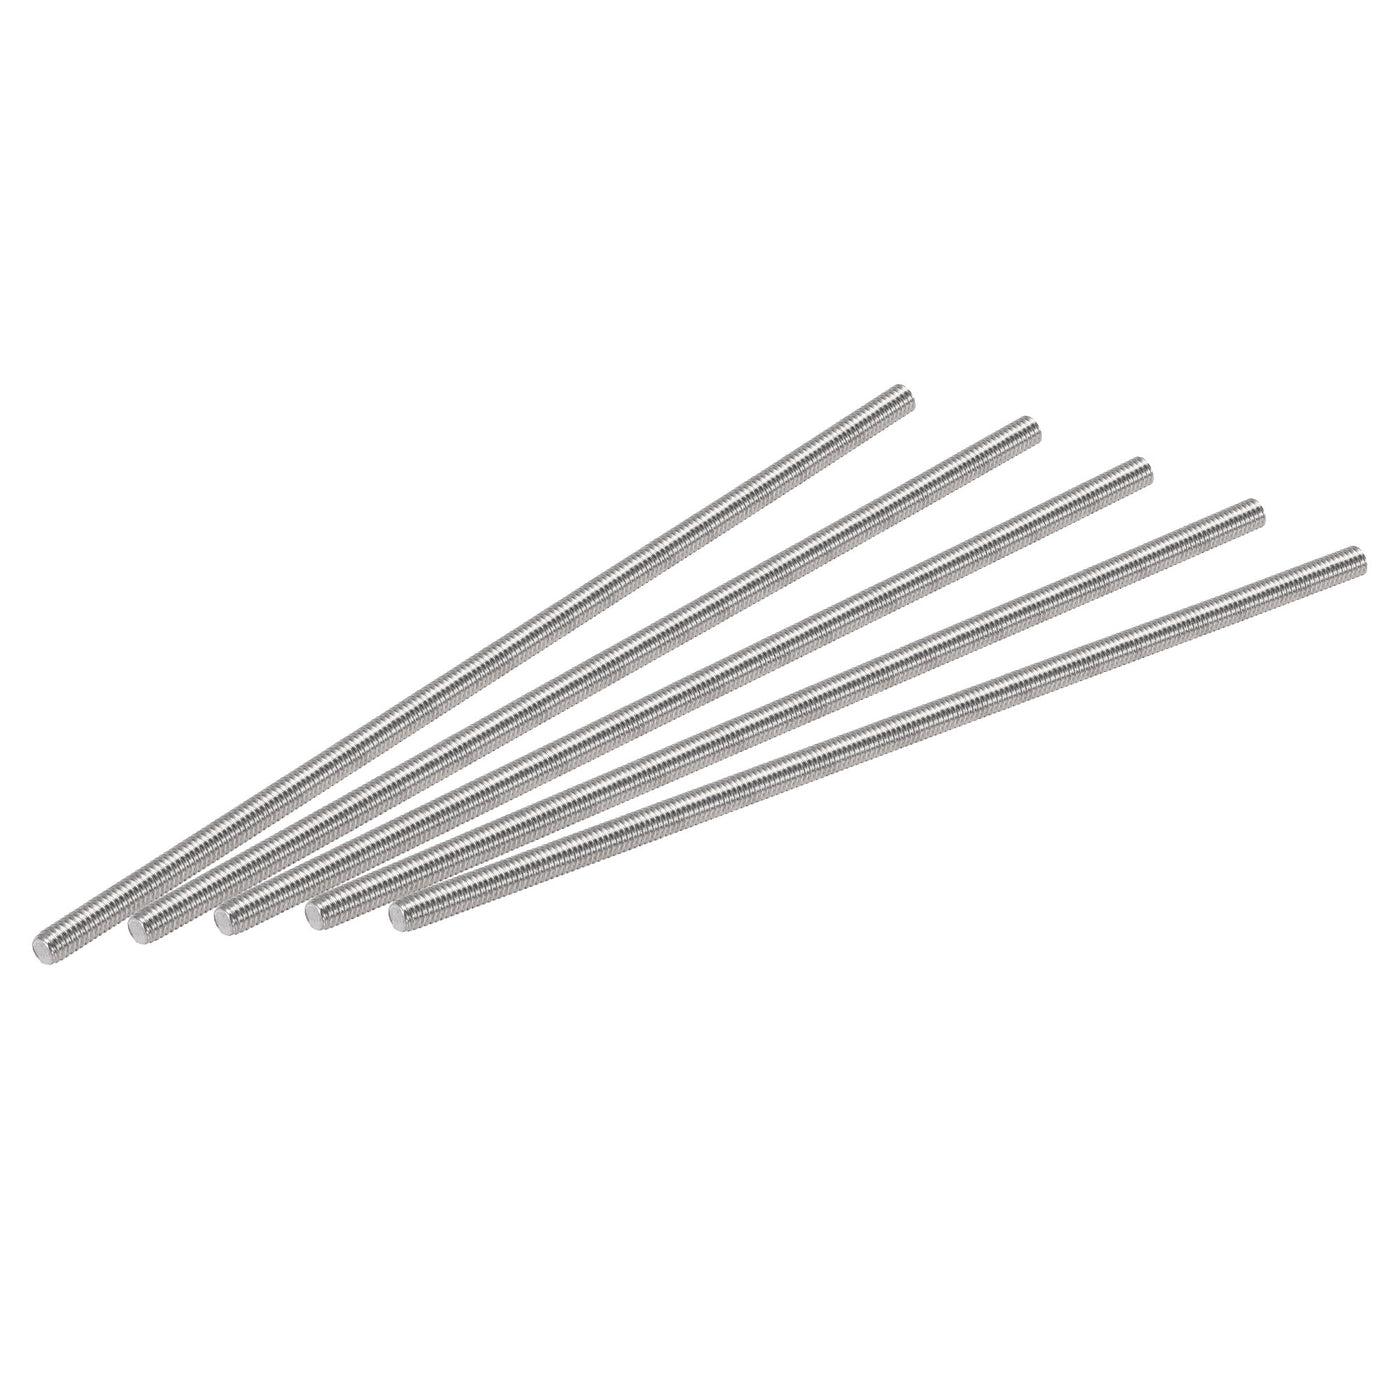 uxcell Uxcell 5pcs M3 x 90mm Fully Threaded Rod 304 Stainless Steel Right Hand 0.5mm Pitch